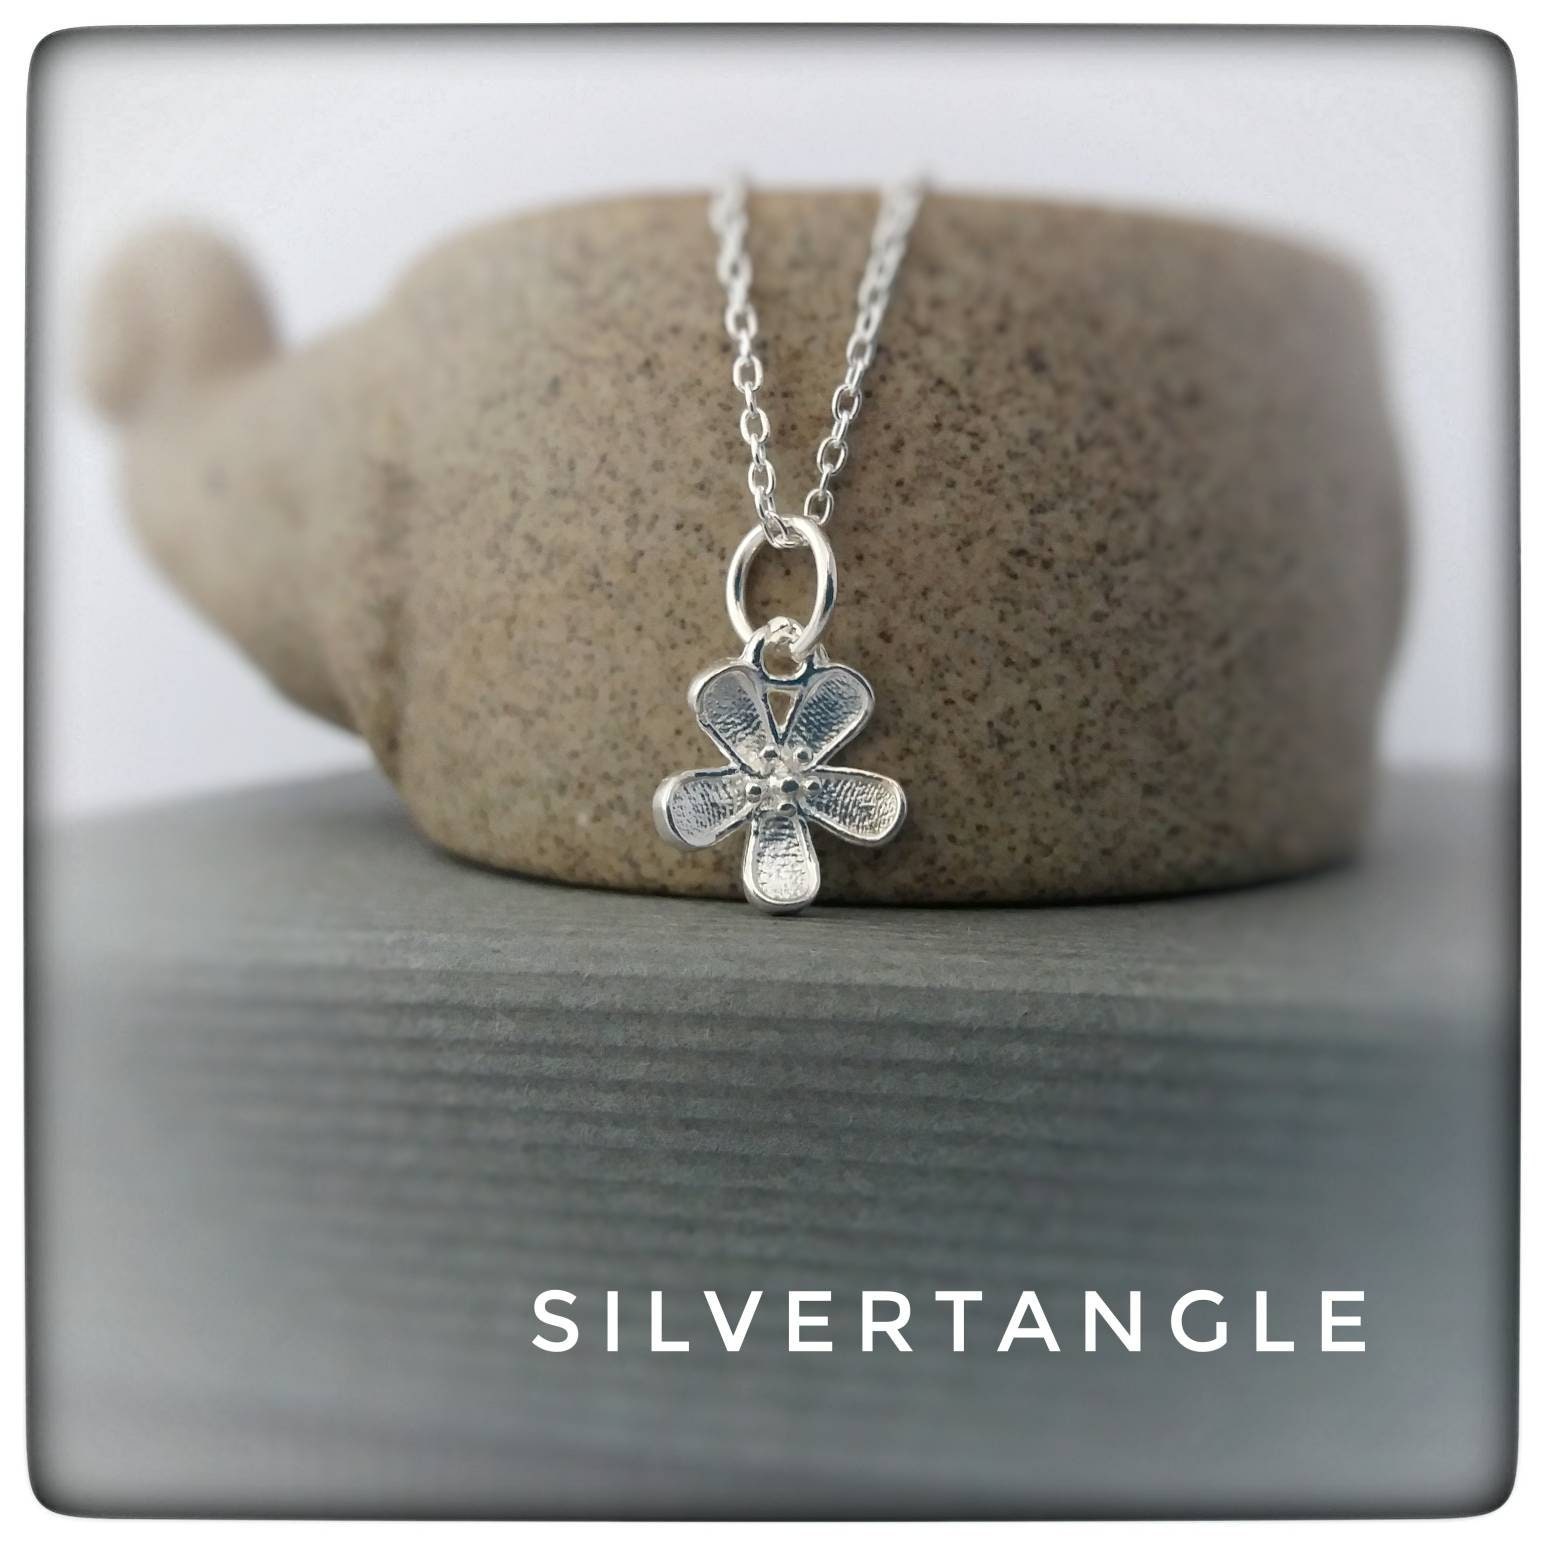 Sterling Silver Flower Necklace - Silver Flower Necklace - Silver Flower Charm Necklace - Flower Pendant Necklace